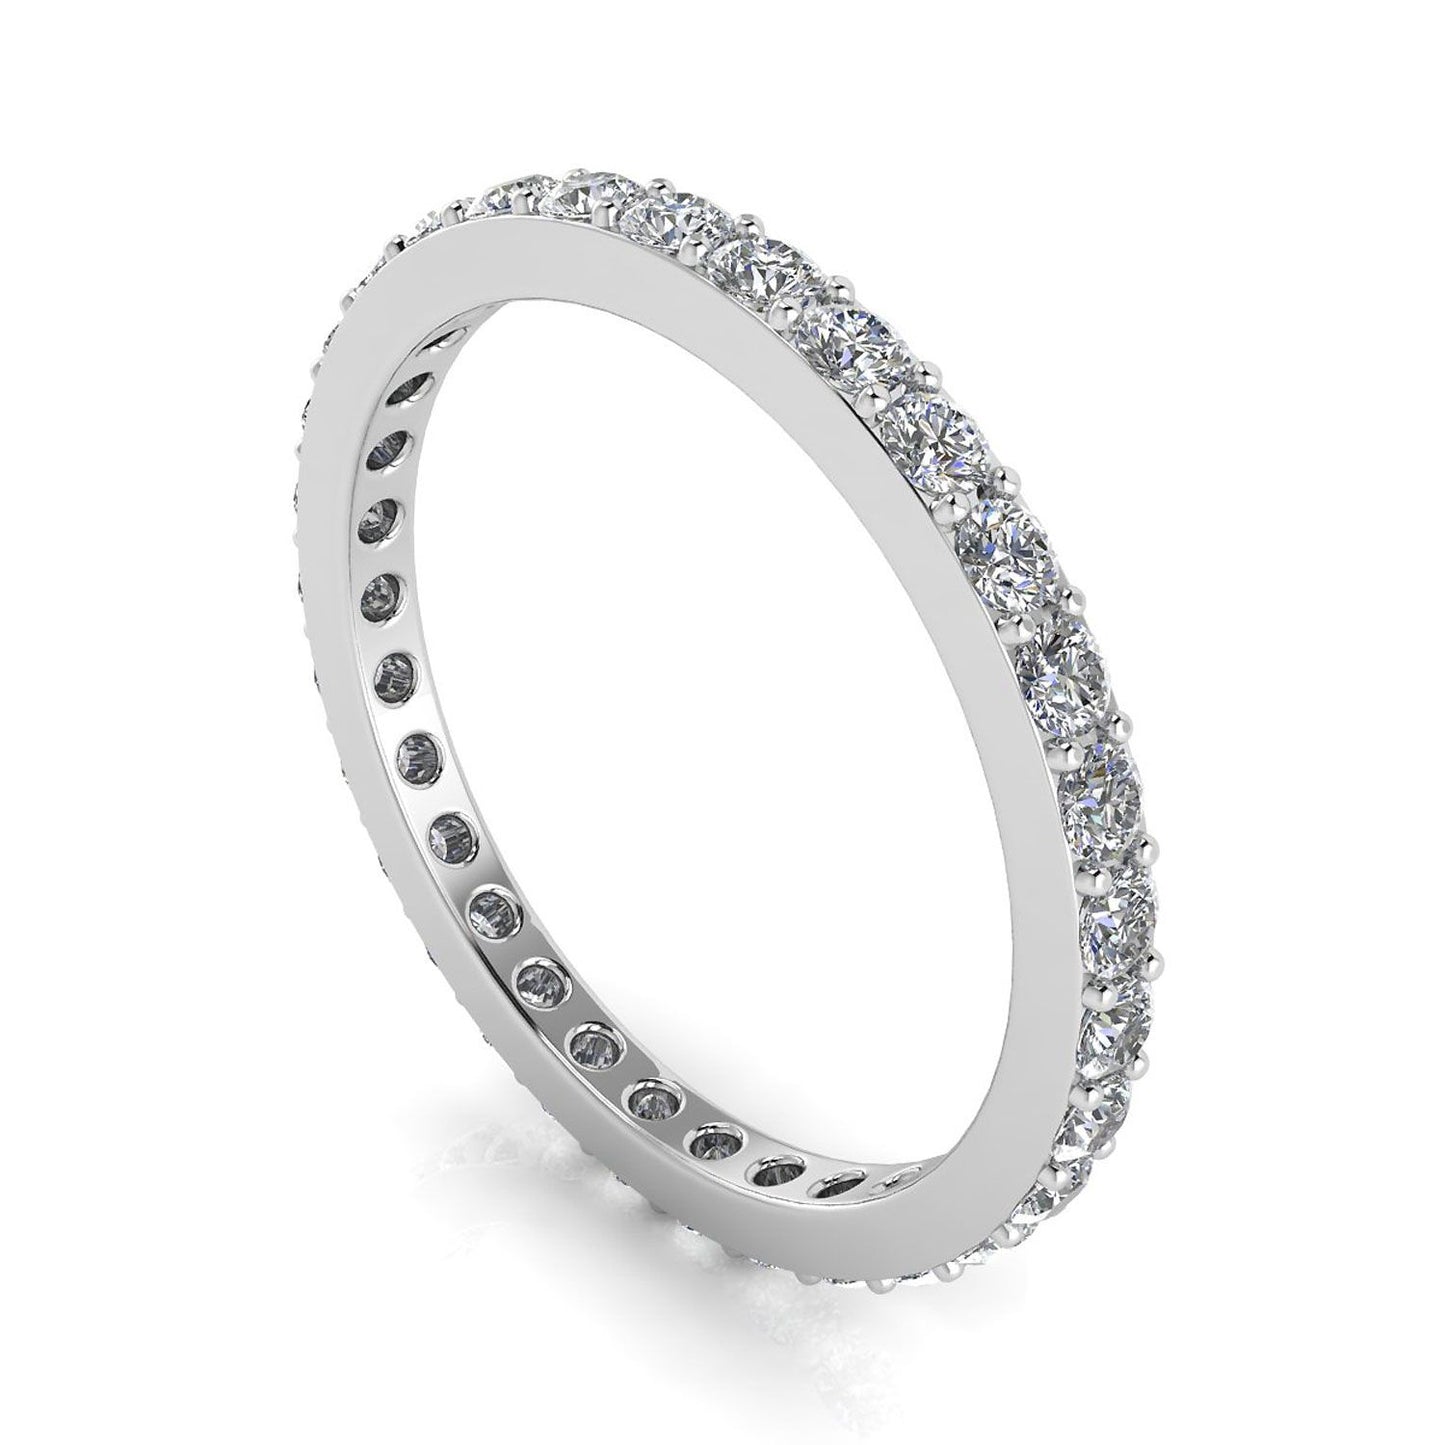 Round Brilliant Cut Diamond Pave Set Eternity Ring In 18k White Gold  (0.46ct. Tw.) Ring Size 6